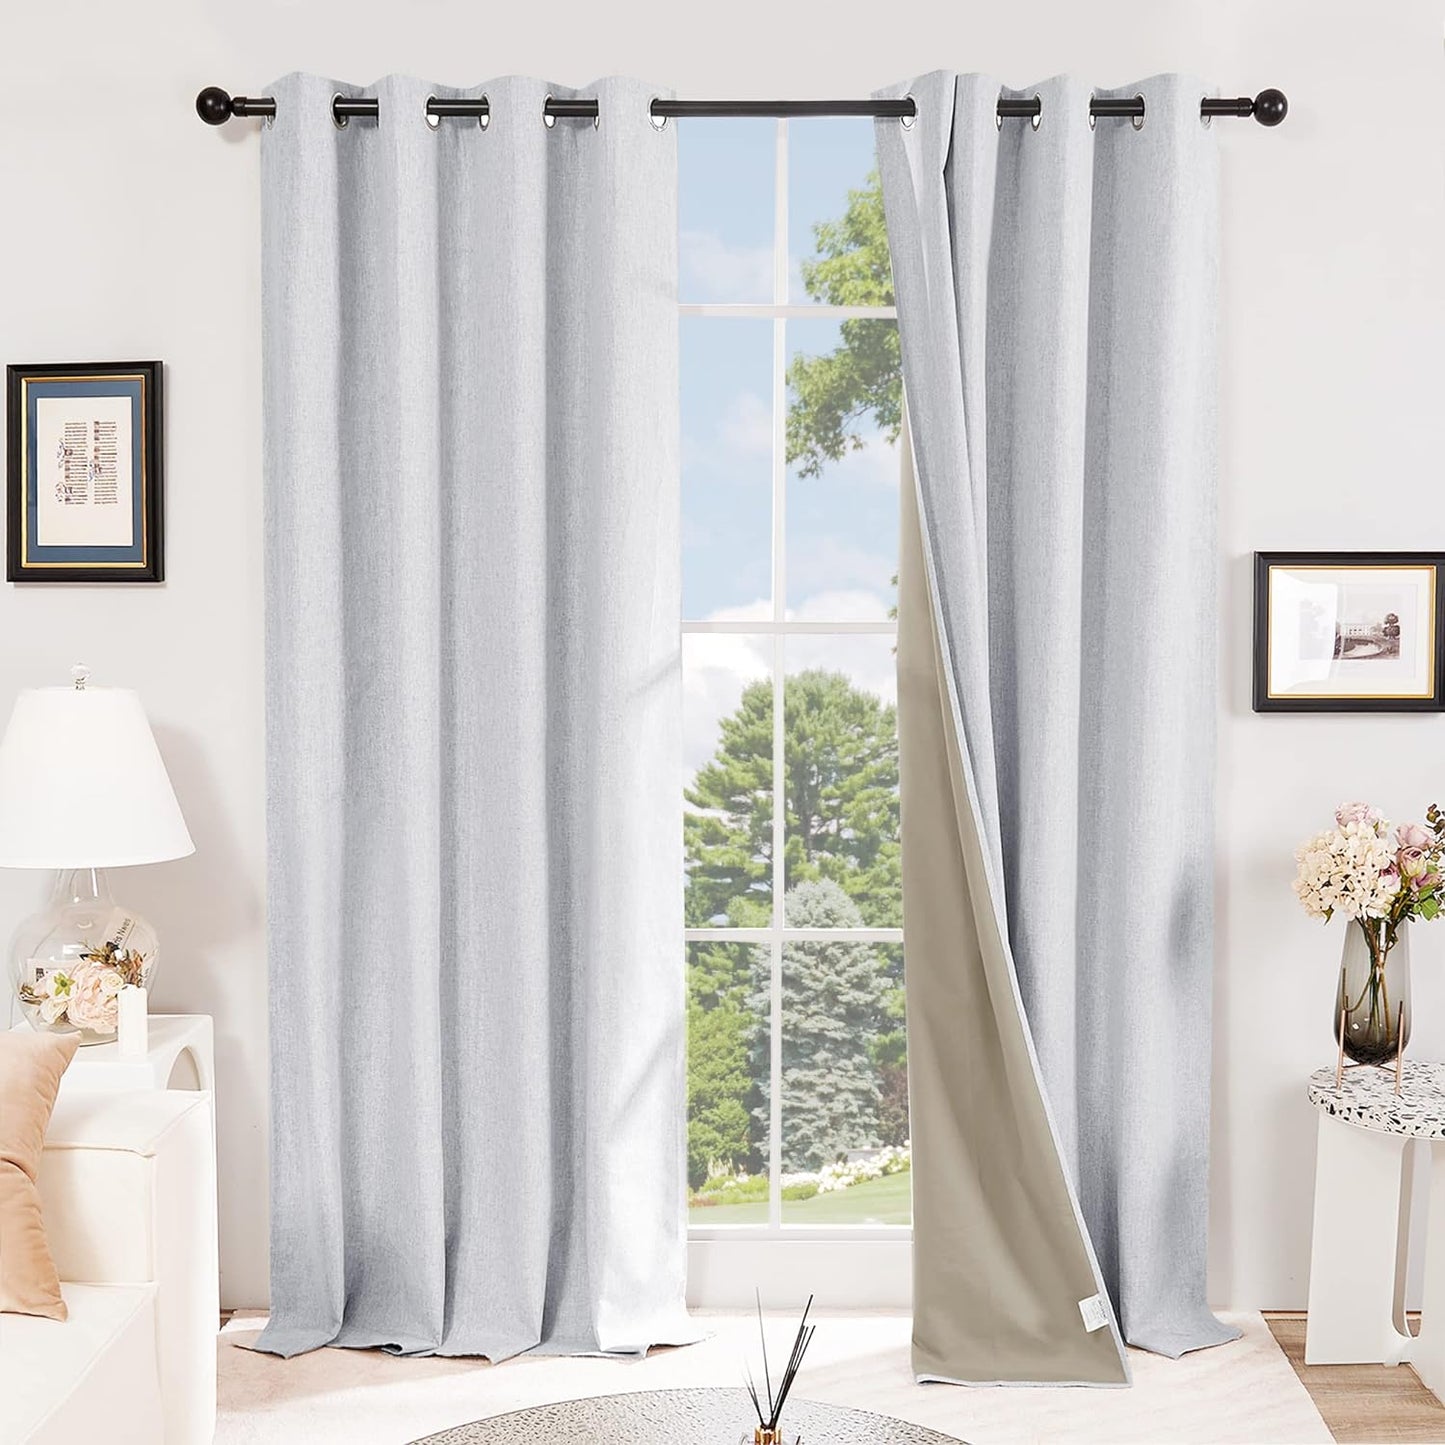 Deconovo Faux Linen Total Blackout Curtains 63 Inches Length, Light Blue, Grommet Thermal Insulated Curtain, Noise Reduction Draperies for Bedroom Living Room, 52" W X 63" L, 1 Pair  DECONOVO Light Grey 52Wx72L Inch 